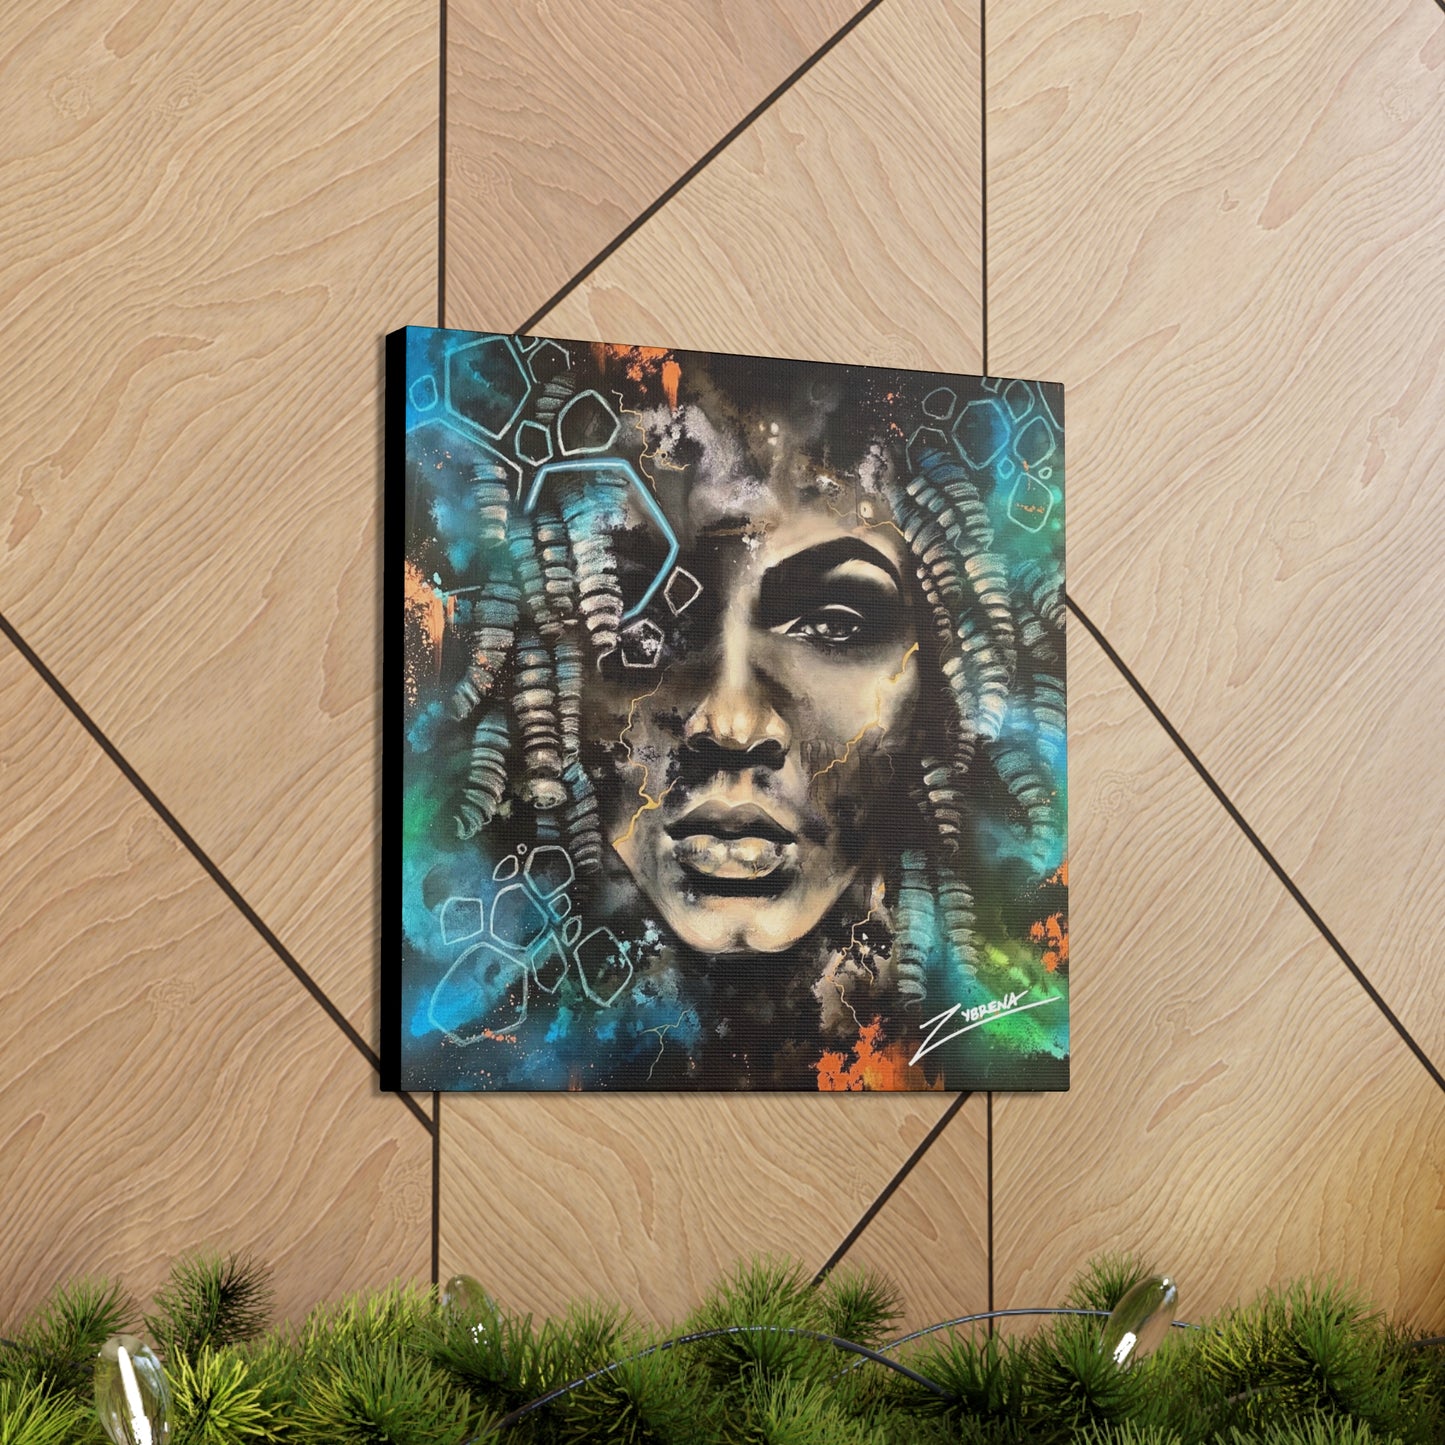 RE:Made (Vol. II) Canvas Gallery Wrapped Print